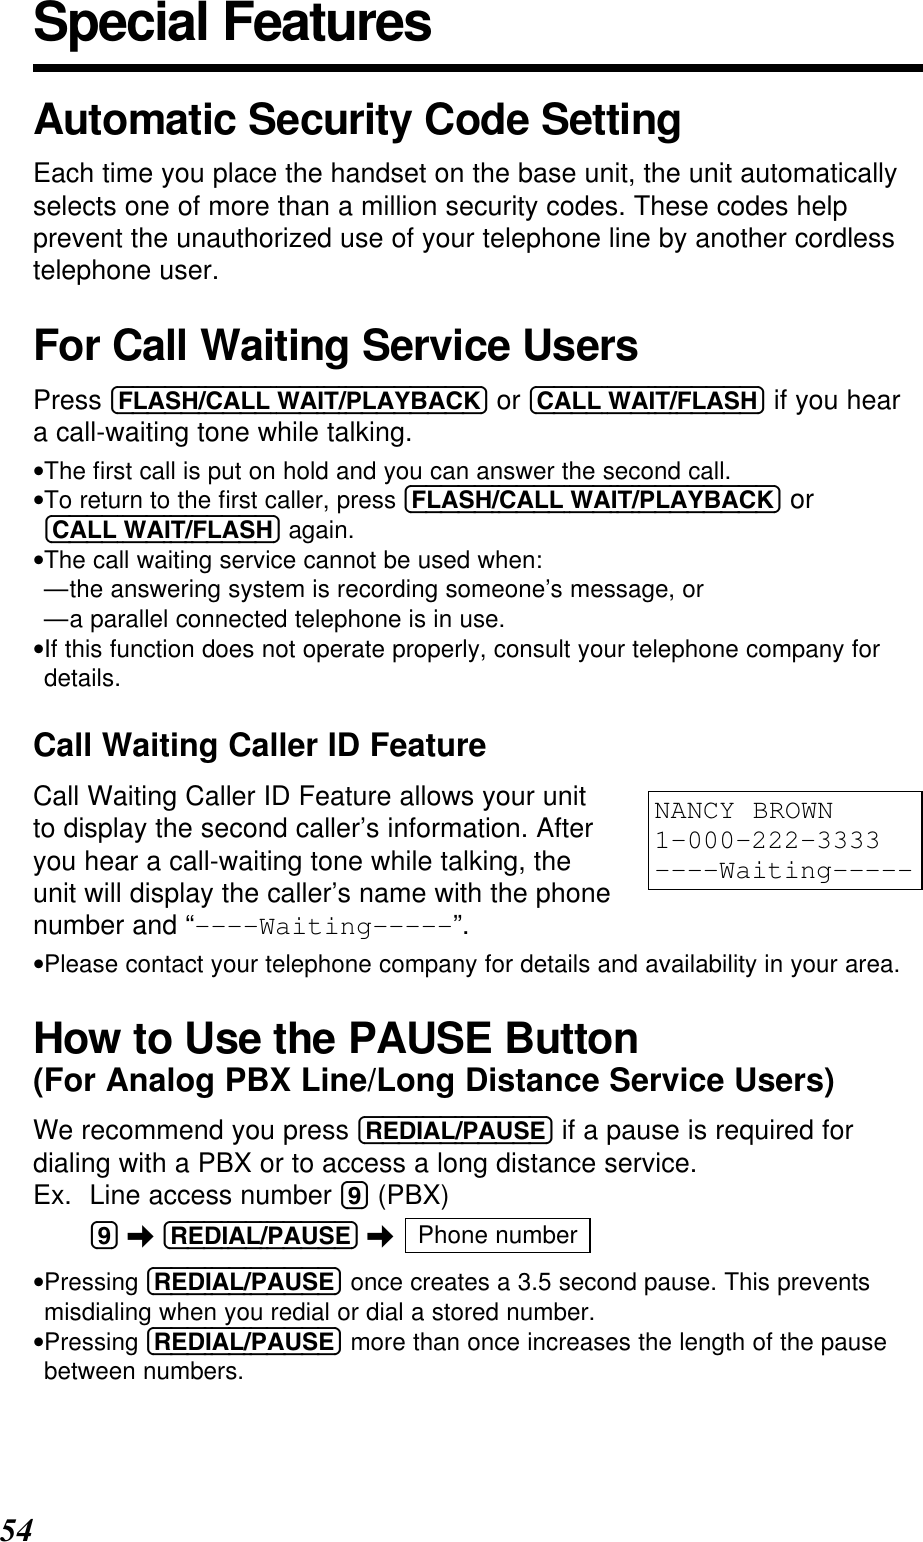 54Special FeaturesAutomatic Security Code SettingEach time you place the handset on the base unit, the unit automaticallyselects one of more than a million security codes. These codes helpprevent the unauthorized use of your telephone line by another cordlesstelephone user.For Call Waiting Service UsersPress (FLASH/CALL!WAIT/PLAYBACK) or (CALL!WAIT/FLASH) if you heara call-waiting tone while talking.•The ﬁrst call is put on hold and you can answer the second call.•To return to the ﬁrst caller, press (FLASH/CALL!WAIT/PLAYBACK) or(CALL!WAIT/FLASH) again.•The call waiting service cannot be used when:—the answering system is recording someone’s message, or—a parallel connected telephone is in use.•If this function does not operate properly, consult your telephone company fordetails.Call Waiting Caller ID FeatureCall Waiting Caller ID Feature allows your unitto display the second caller’s information. Afteryou hear a call-waiting tone while talking, theunit will display the caller’s name with the phonenumber and “----Waiting-----”.•Please contact your telephone company for details and availability in your area.How to Use the PAUSE Button(For Analog PBX Line/Long Distance Service Users)We recommend you press (REDIAL/PAUSE) if a pause is required fordialing with a PBX or to access a long distance service.Ex. Line access number (9) (PBX)(9) \(REDIAL/PAUSE) \•Pressing (REDIAL/PAUSE) once creates a 3.5 second pause. This preventsmisdialing when you redial or dial a stored number.•Pressing (REDIAL/PAUSE) more than once increases the length of the pausebetween numbers.Phone numberNANCY BROWN1-000-222-3333----Waiting-----